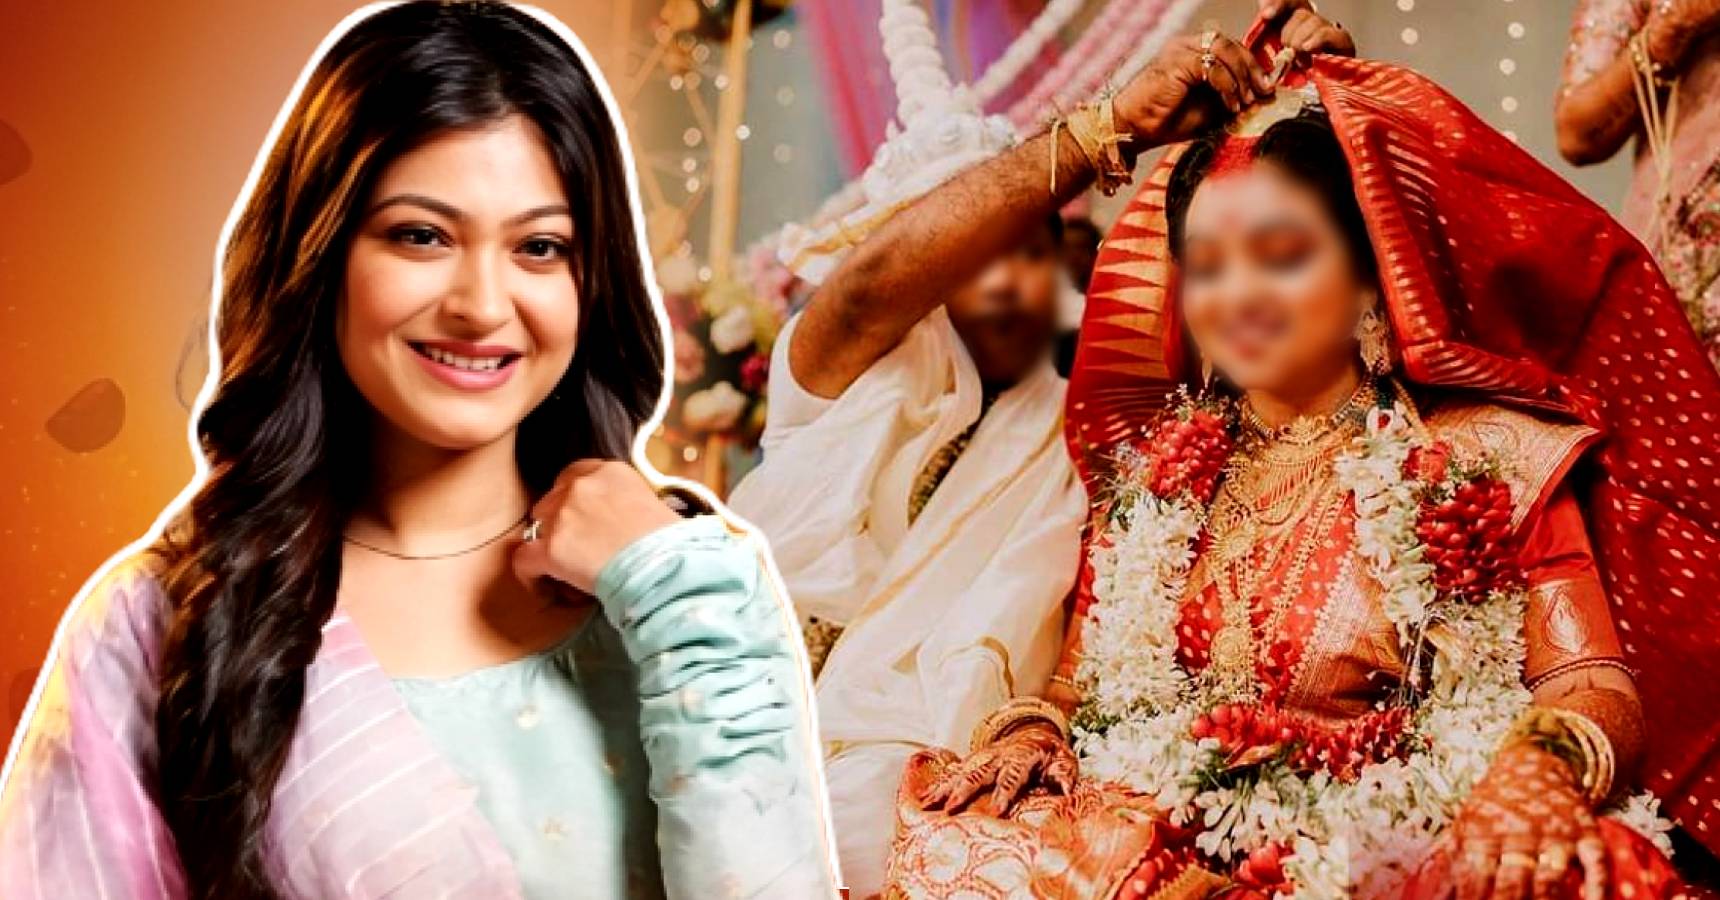 Roopsagore Moner Manush actress Rooqma Ray marriage picture goes viral